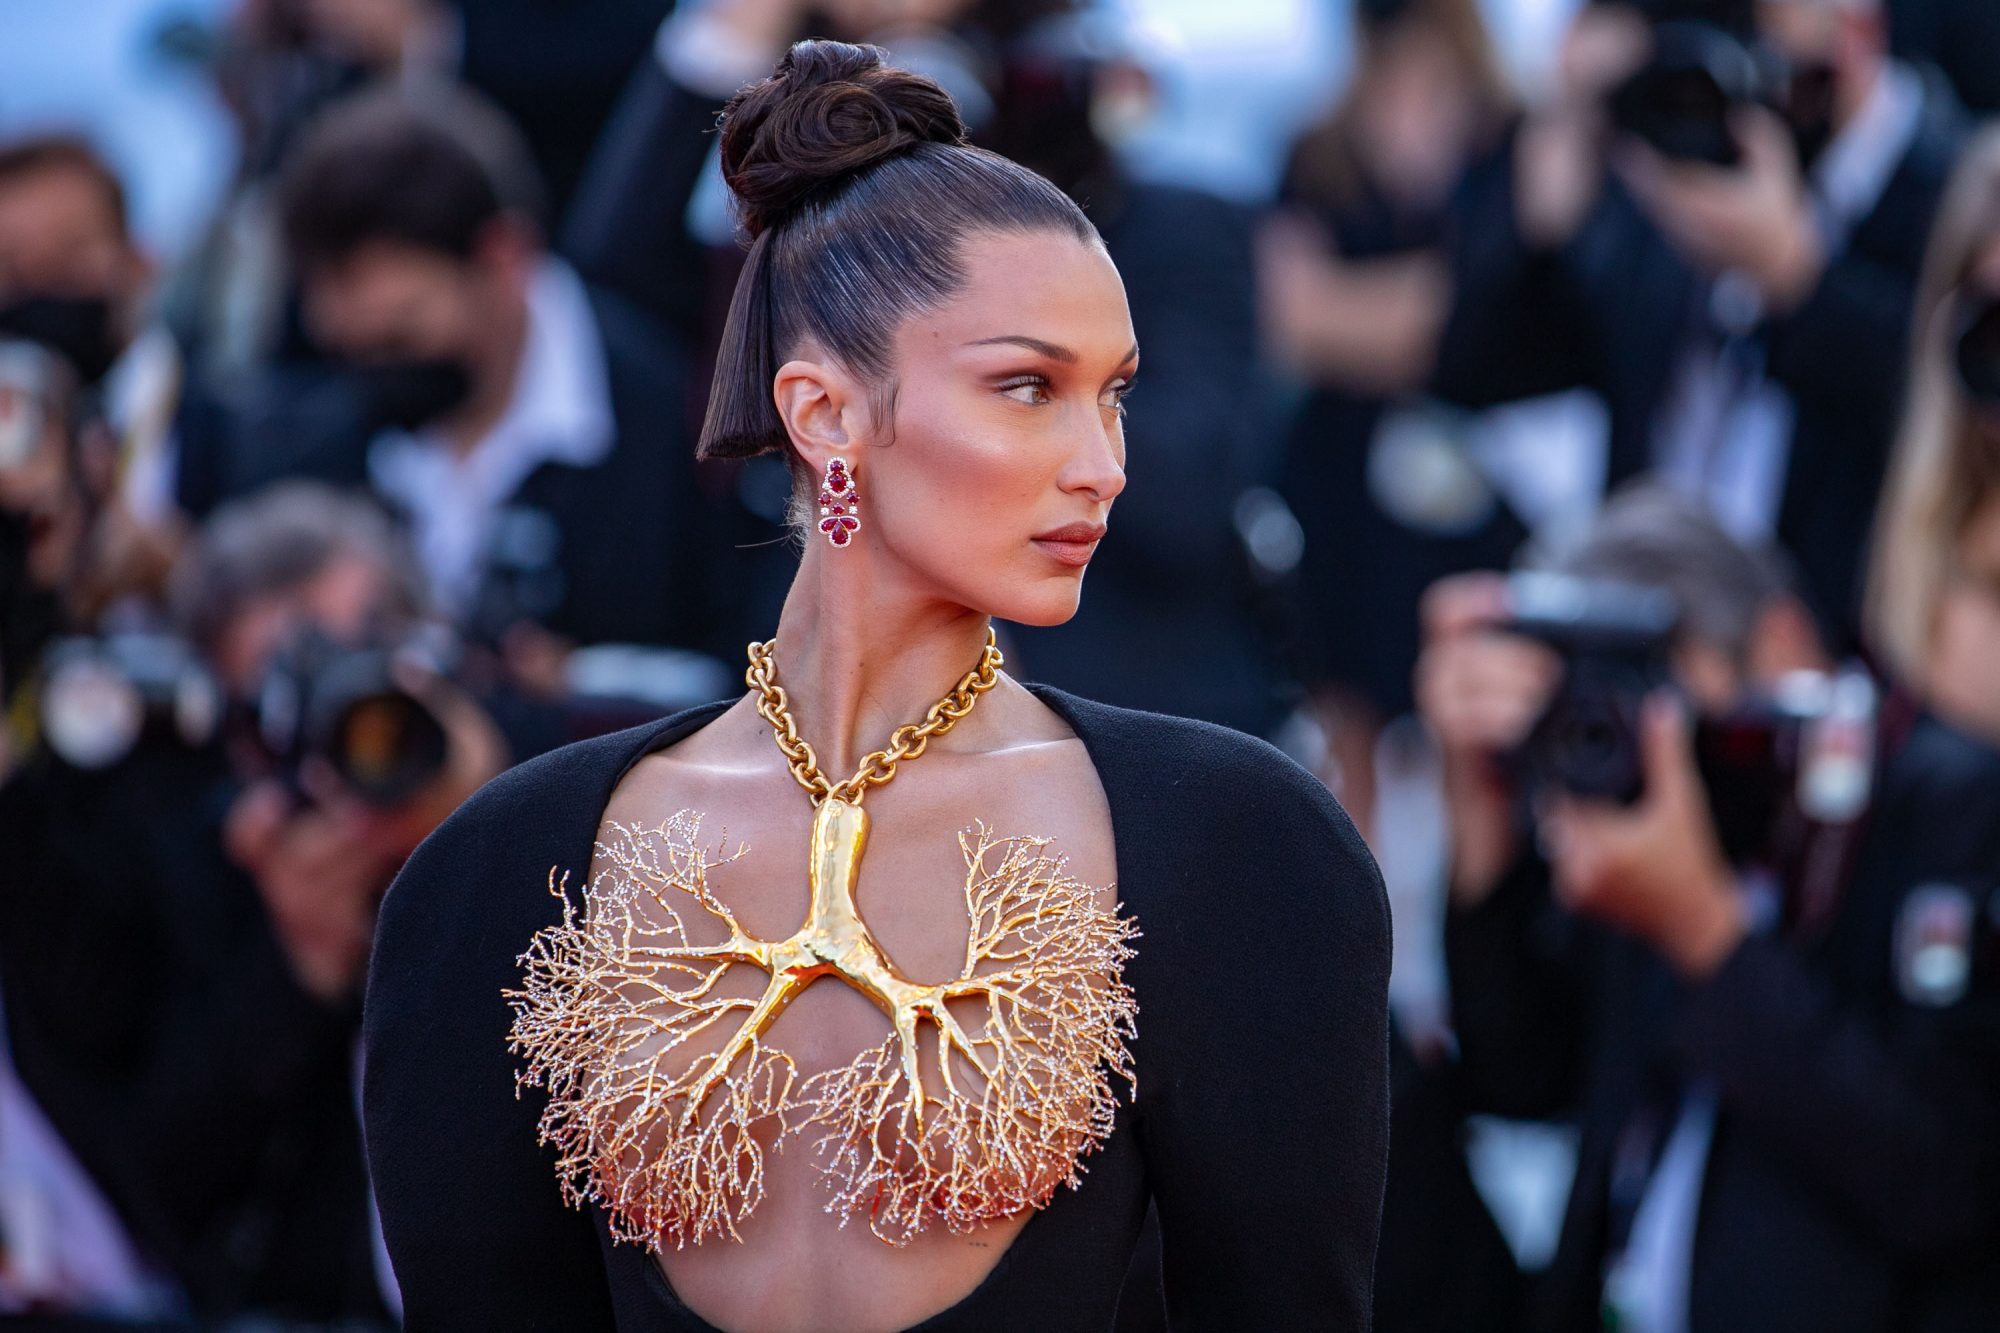 The Ultimate Guide to the Weird Girl Aesthetic That Bella Hadid and Gigi Hadid Can't Have Enough Of